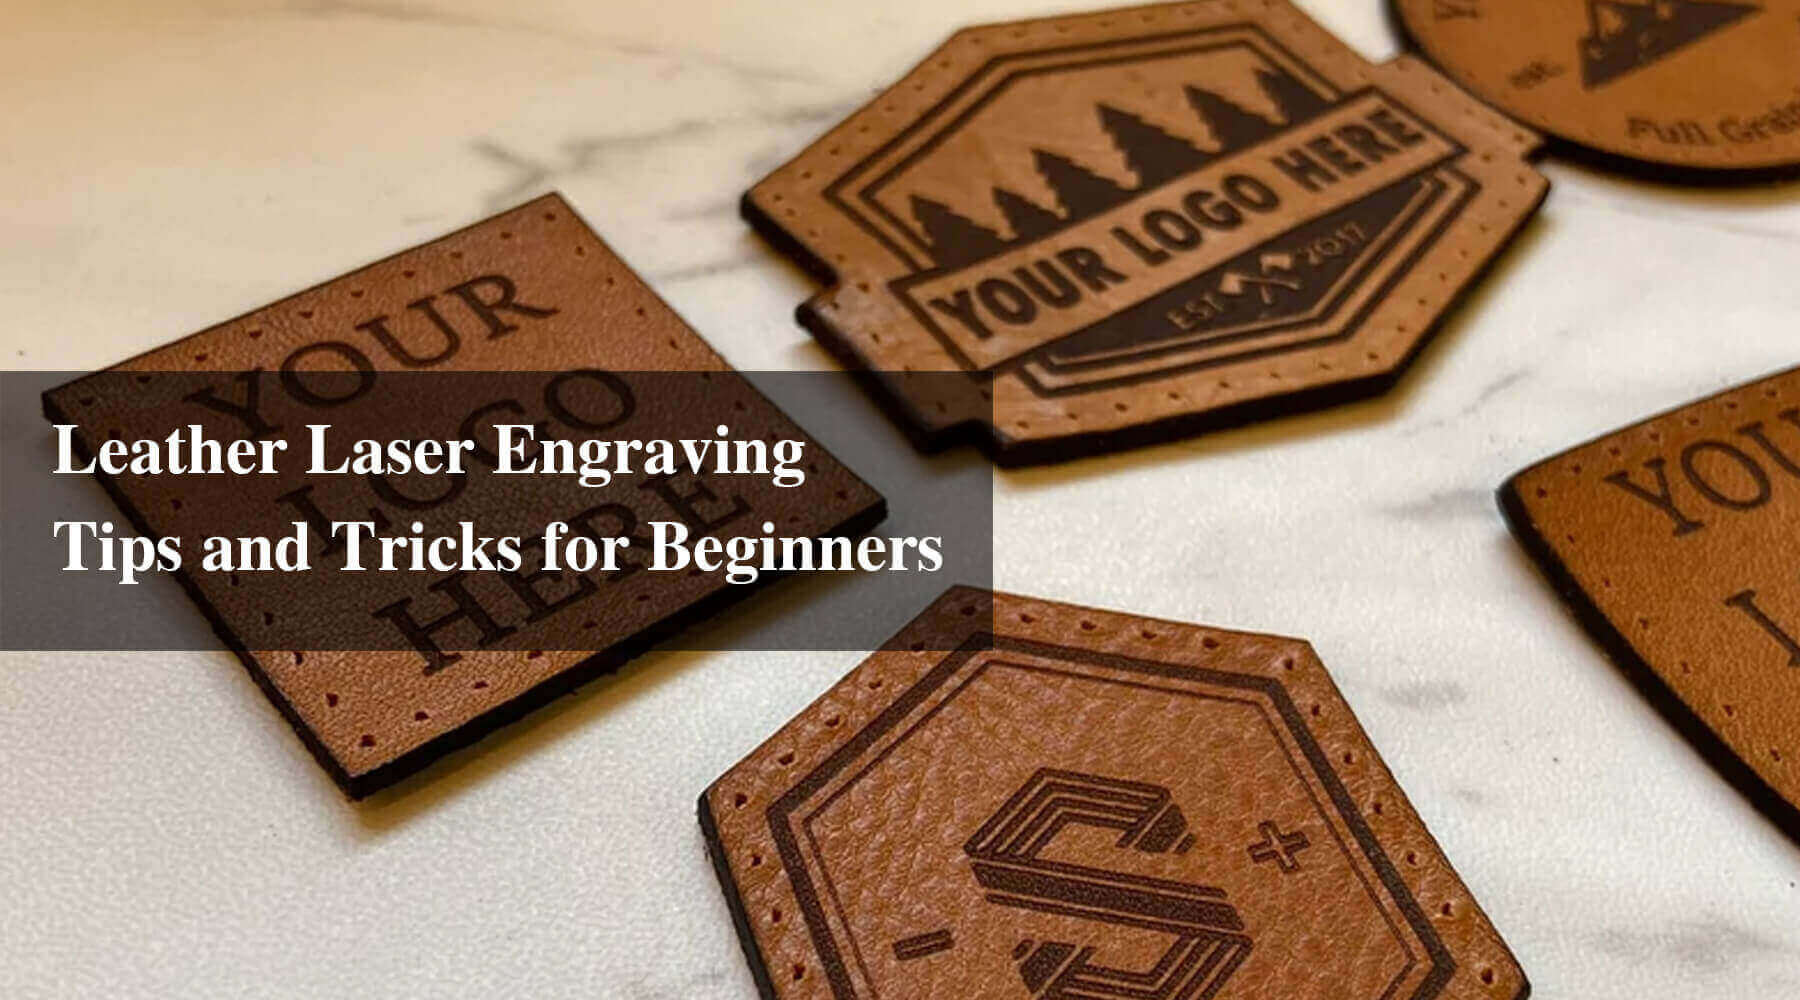 Leather Laser Engraving Tips and Tricks for Beginners